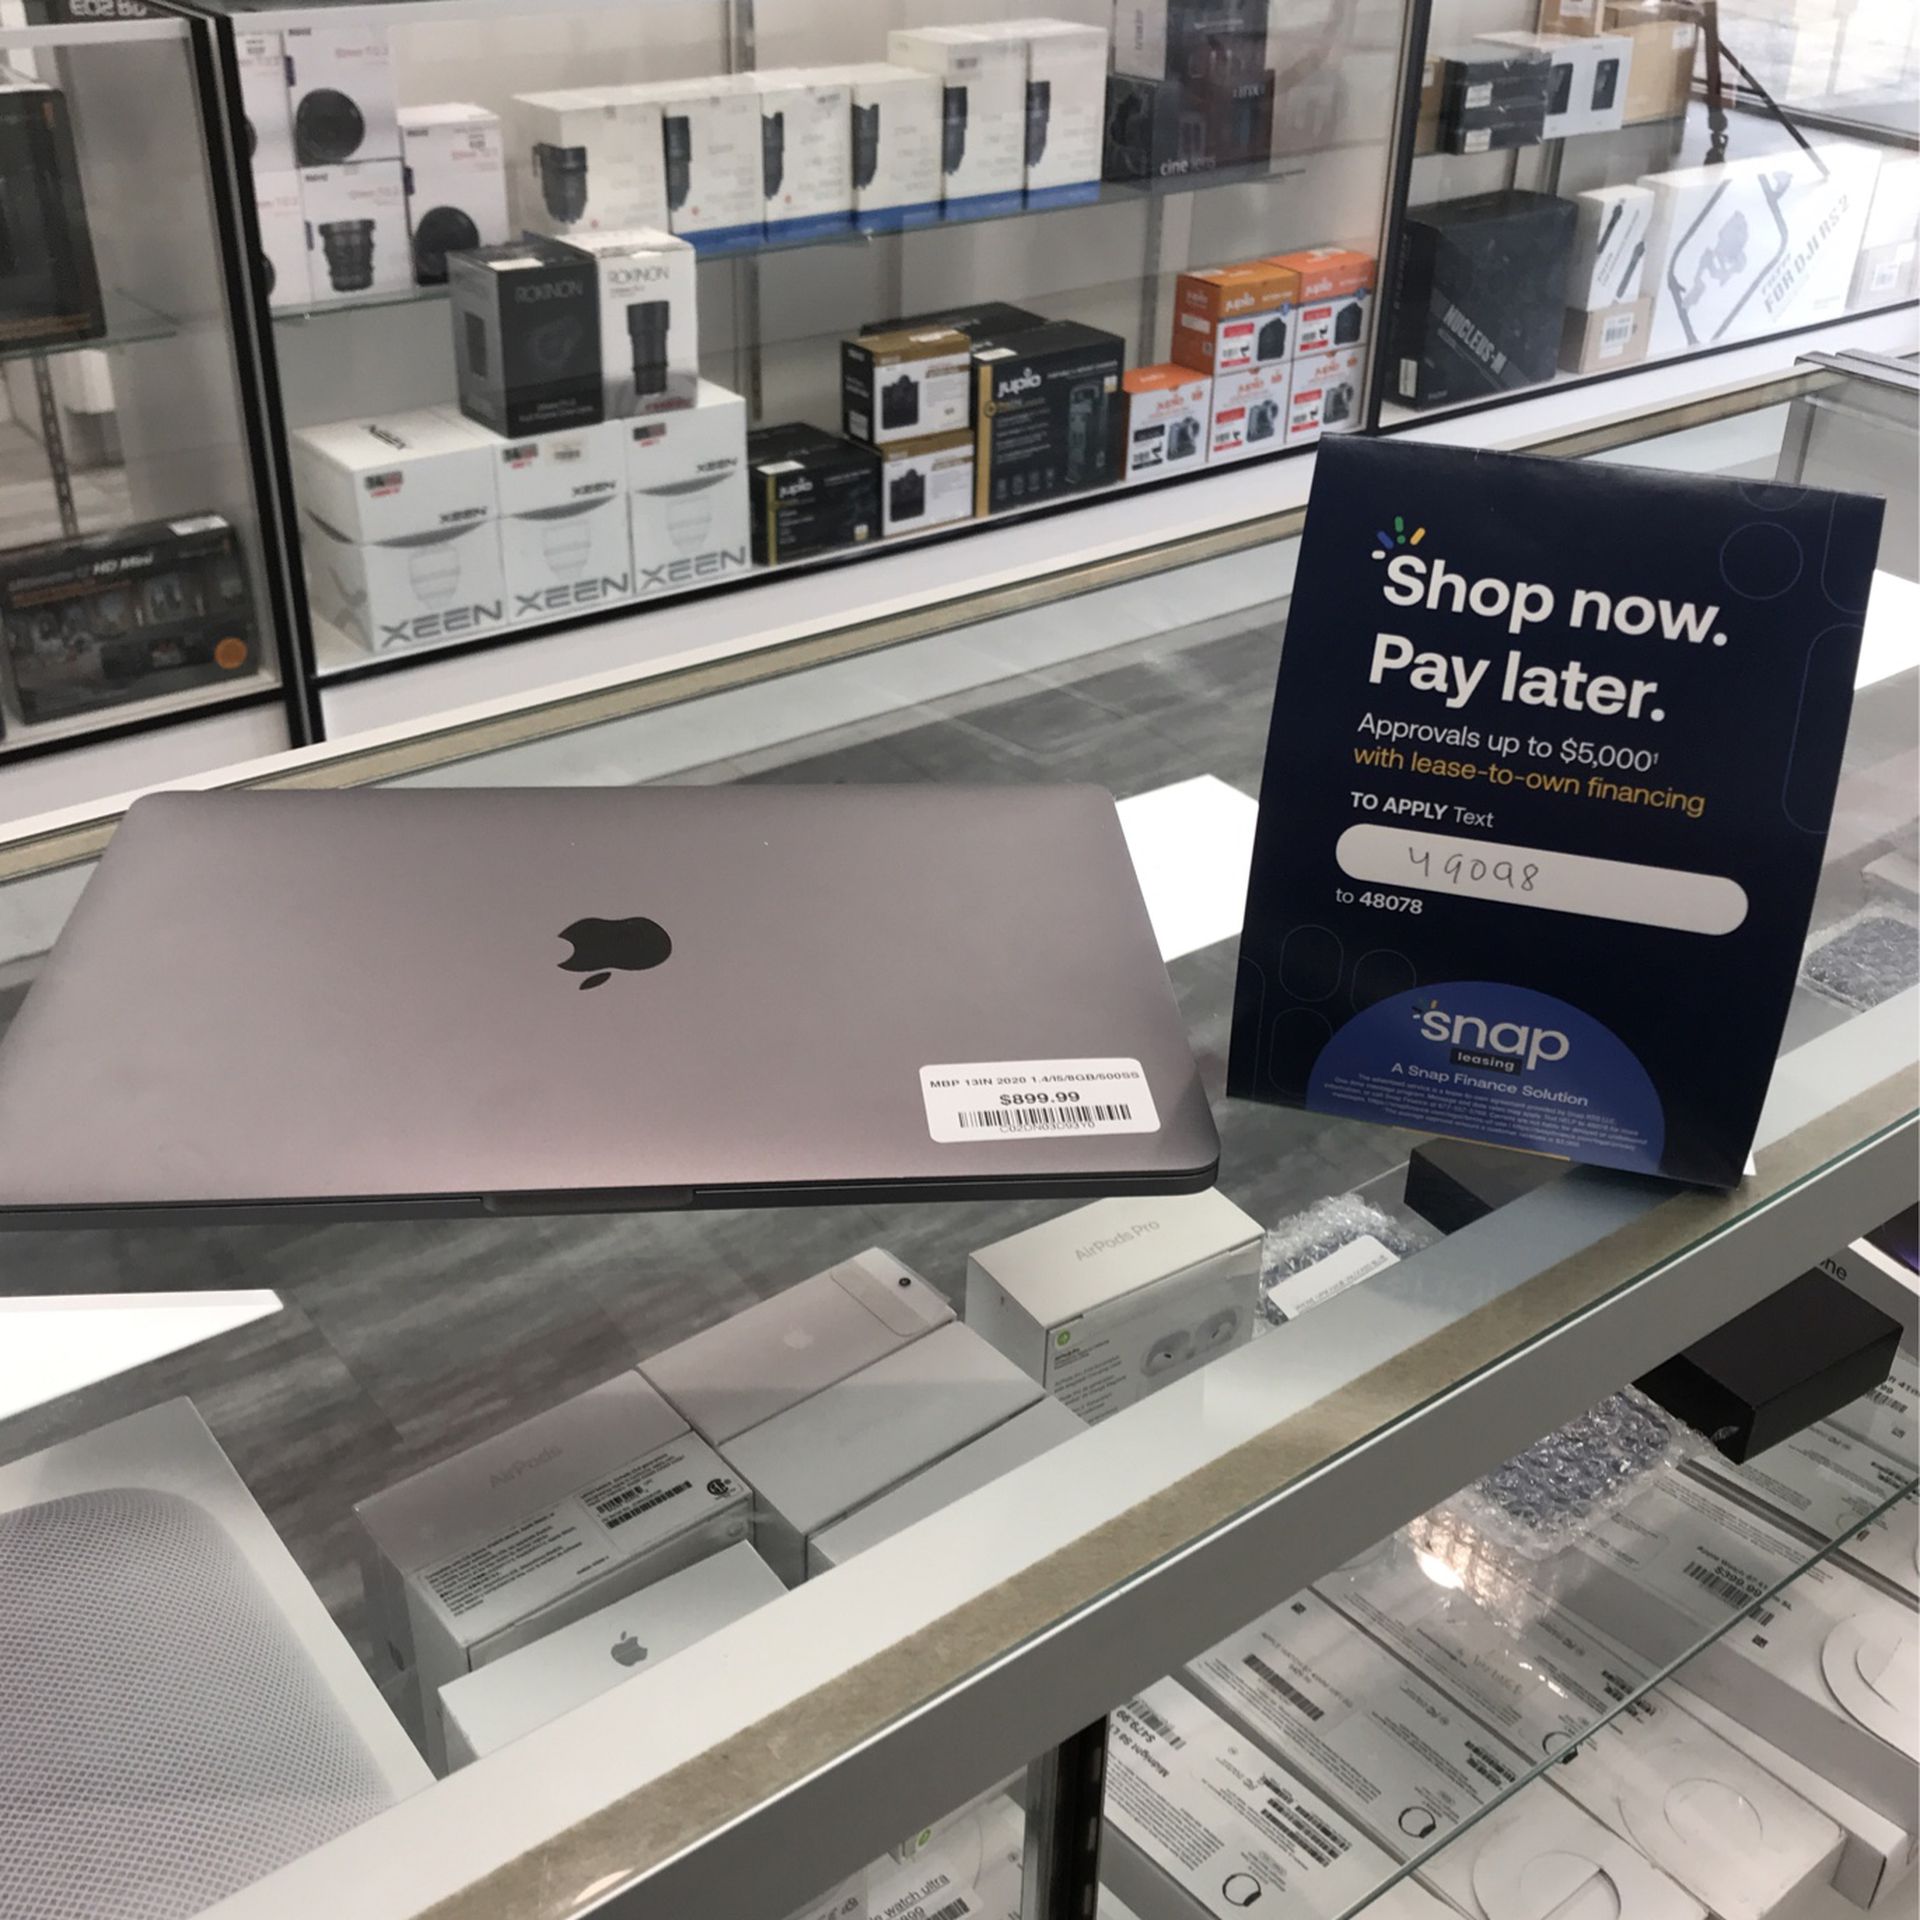 MacBook Pro 13” 2020 Core I5 8gb Ram And 500ssd With Warranty 